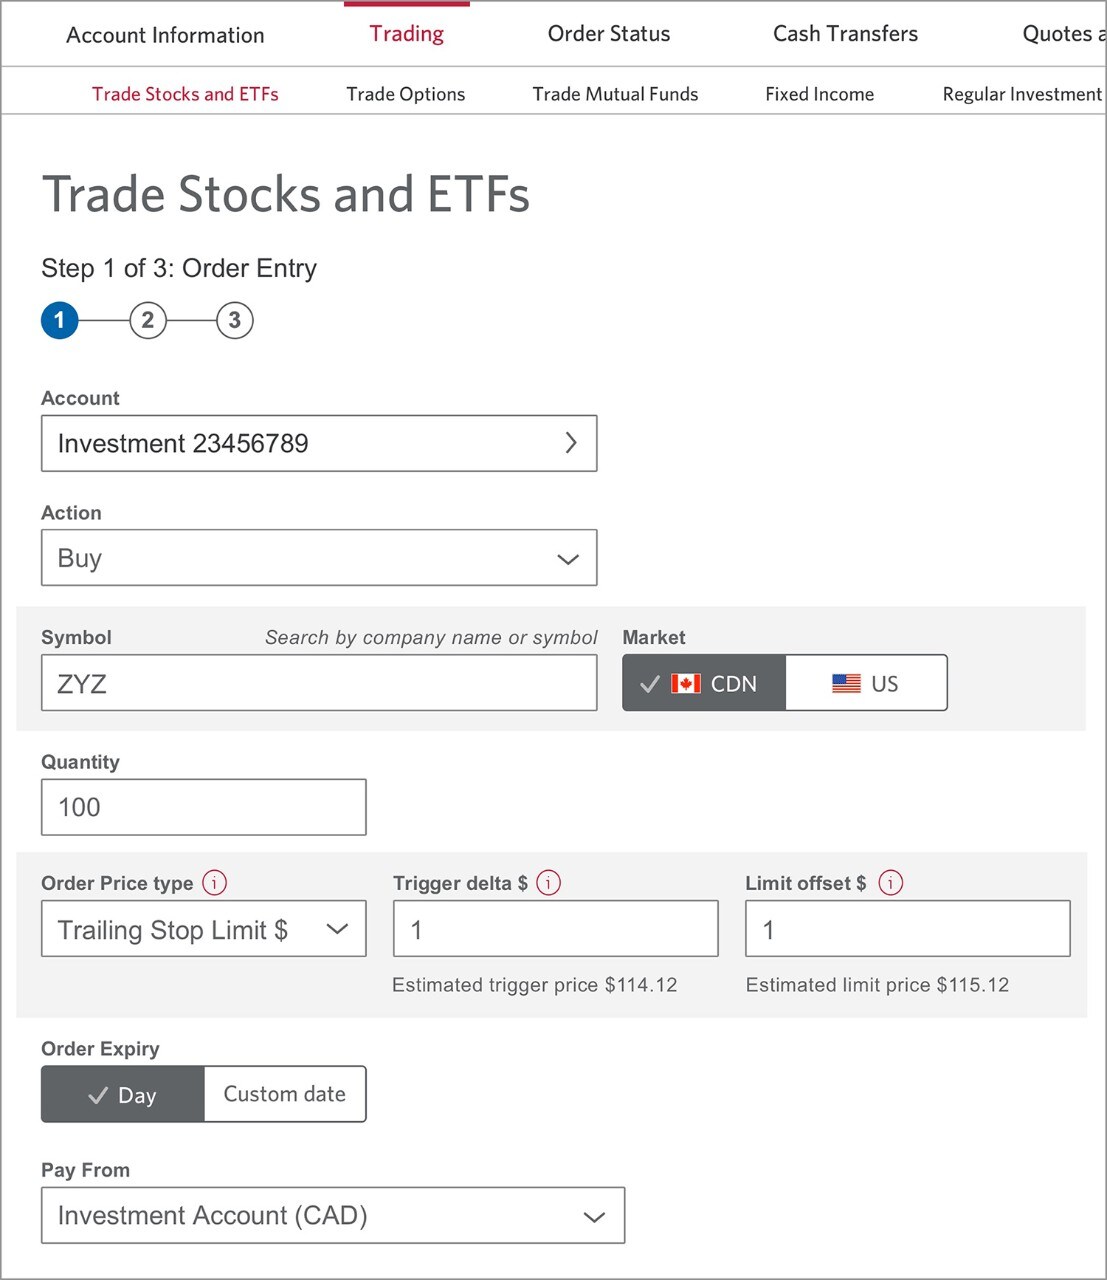 The Trade Stocks and ETFs form.